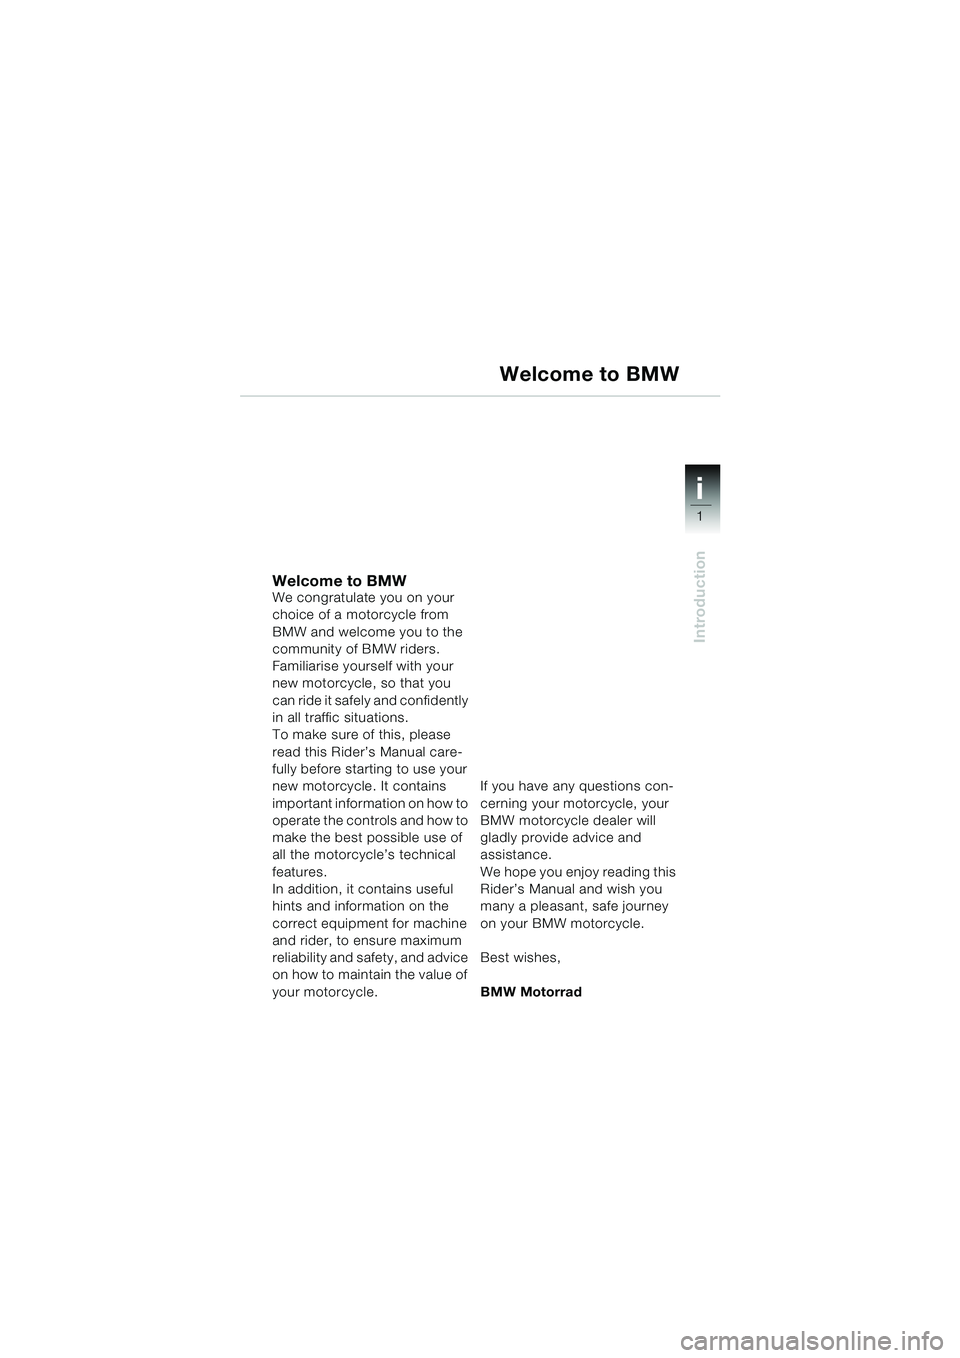 BMW MOTORRAD R 1150 RS 2002  Riders Manual (in English) 1
Introduction
i
Welcome to BMWWe congratulate you on your 
choice of a motorcycle from 
BMW and welcome you to the 
community of BMW riders.
Familiarise yourself with your 
new motorcycle, so that yo